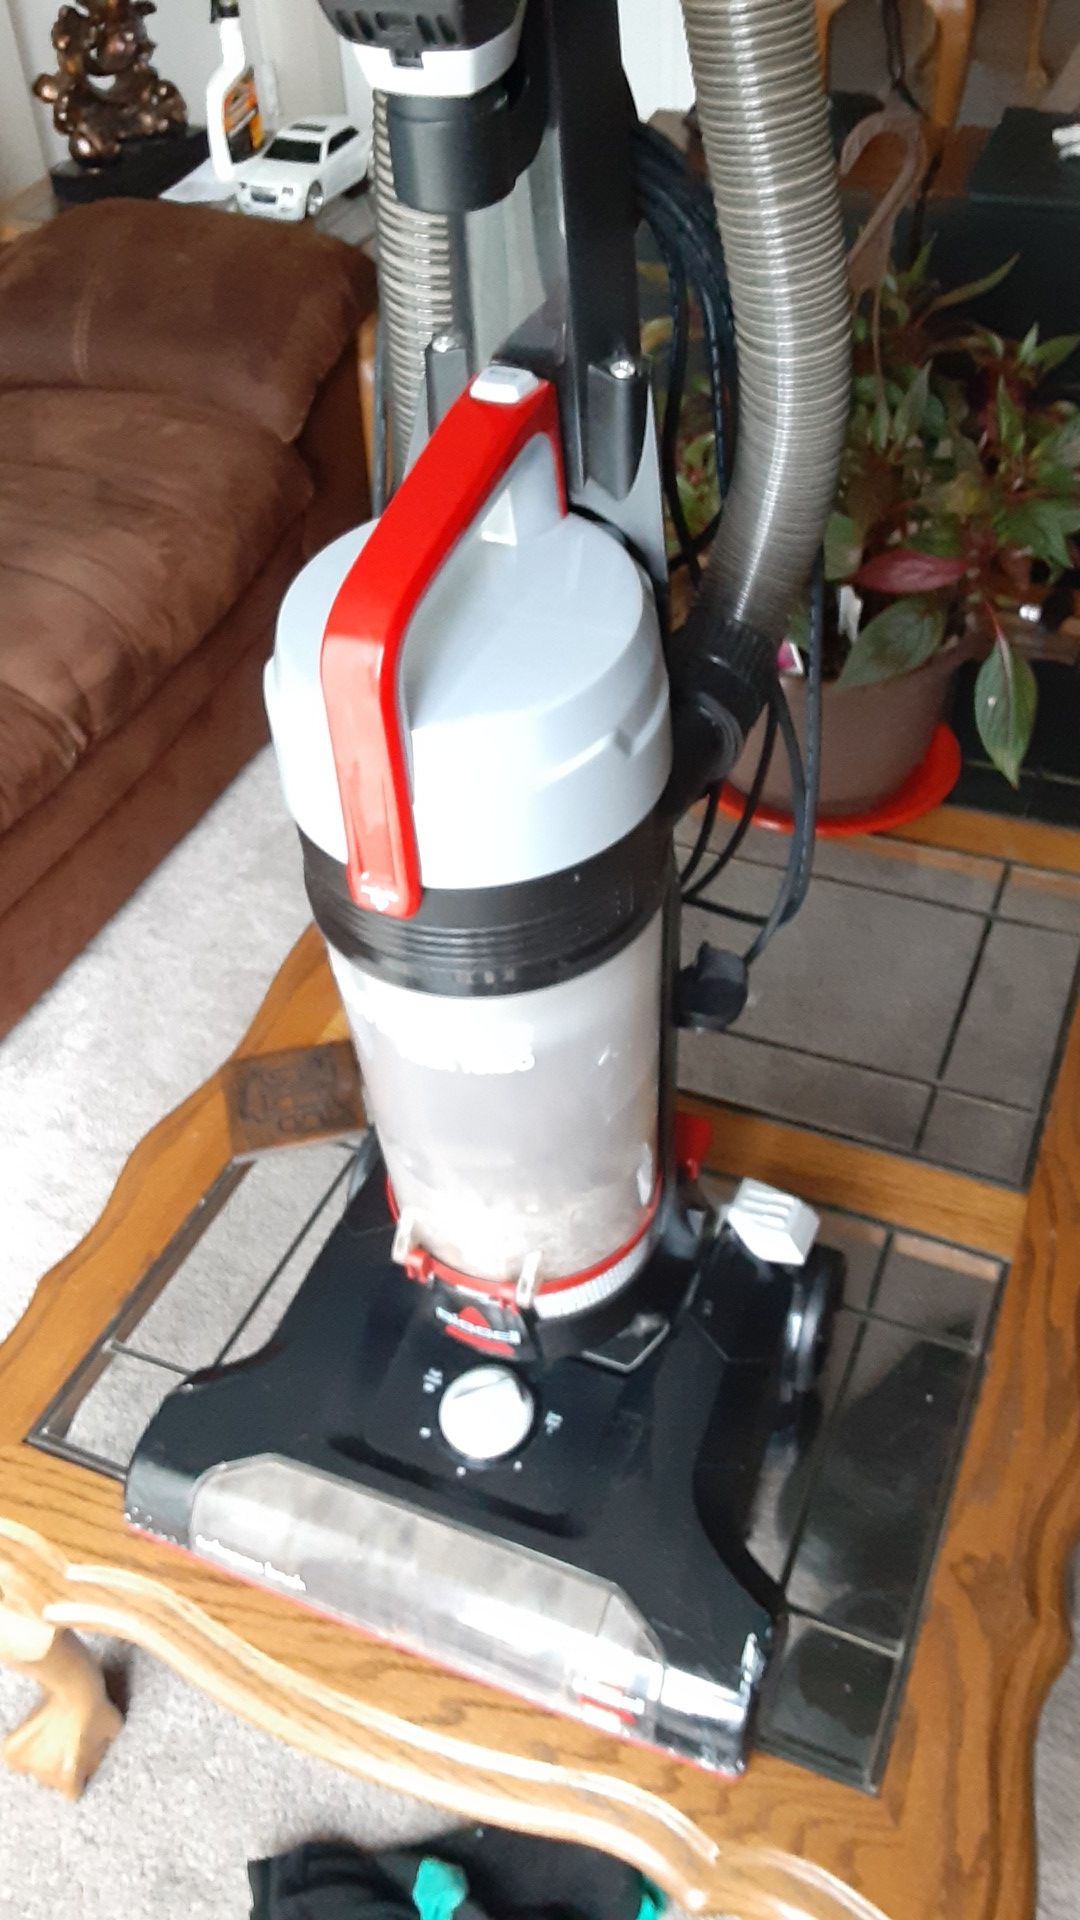 Bissell powerForce helix turbo vacuum like new